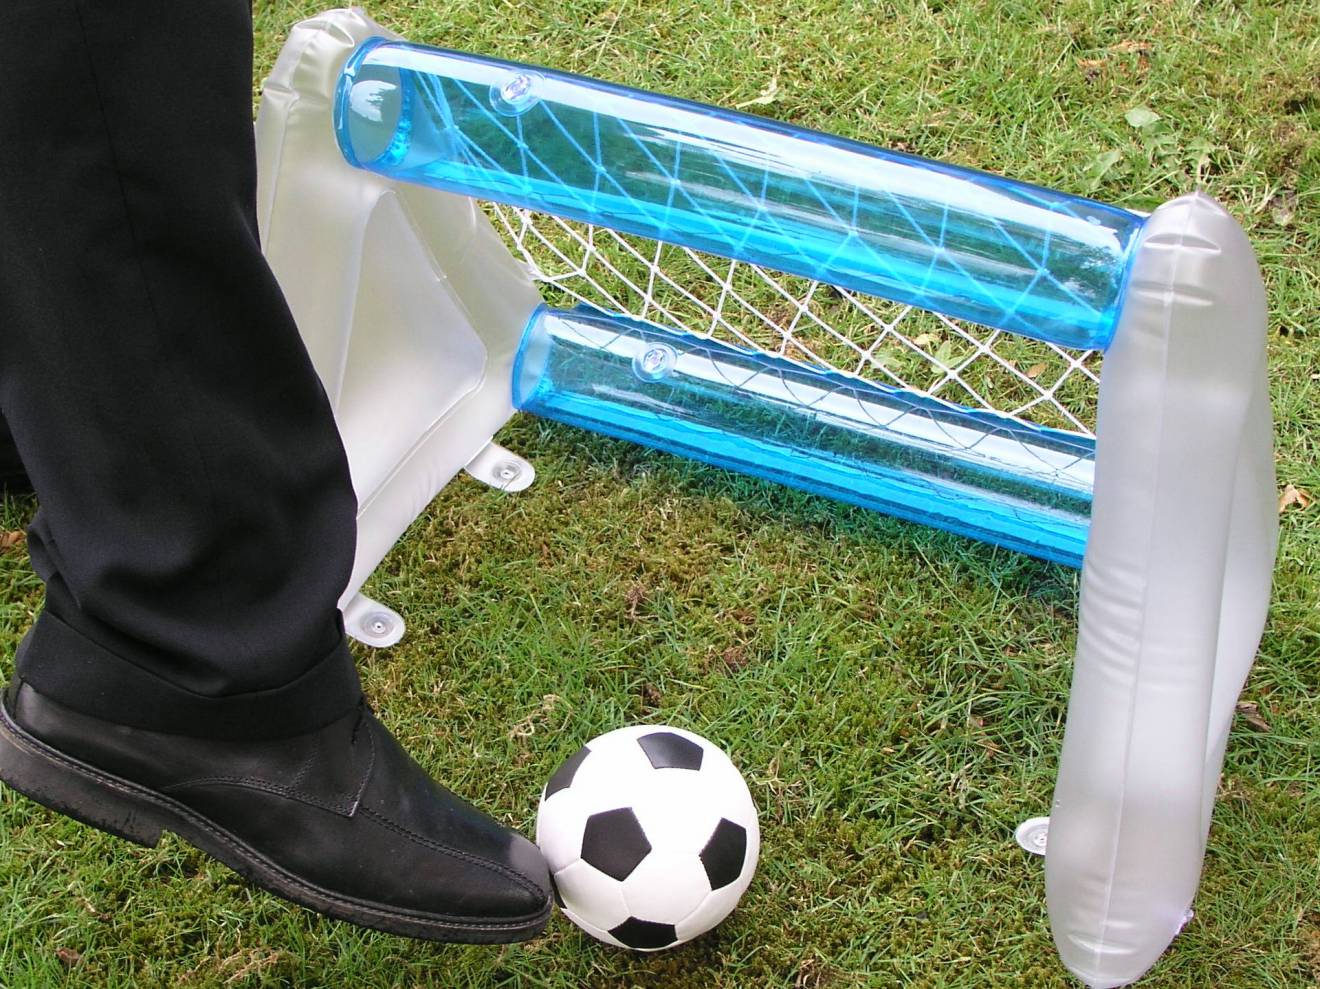 Miniature airtight inflatable games Voetbal, Goal, spelletjes, spelobject X-Treme Creations